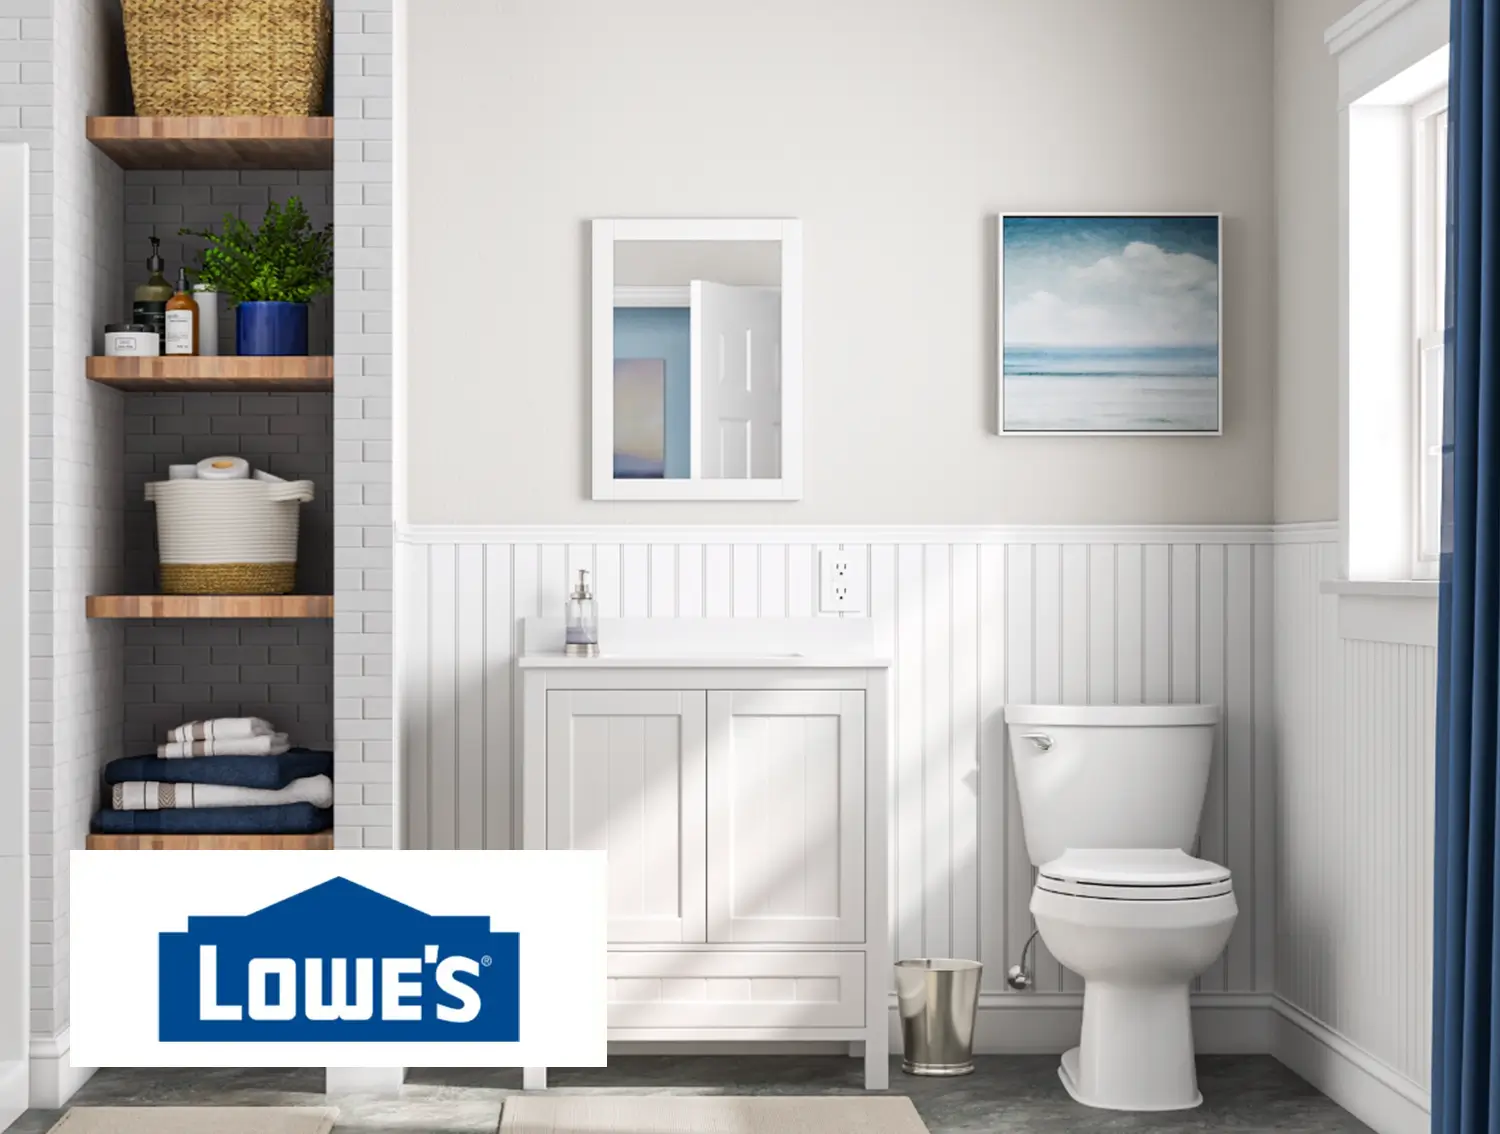 How We Helped Lowe’s Transform Their Bath Category Visuals